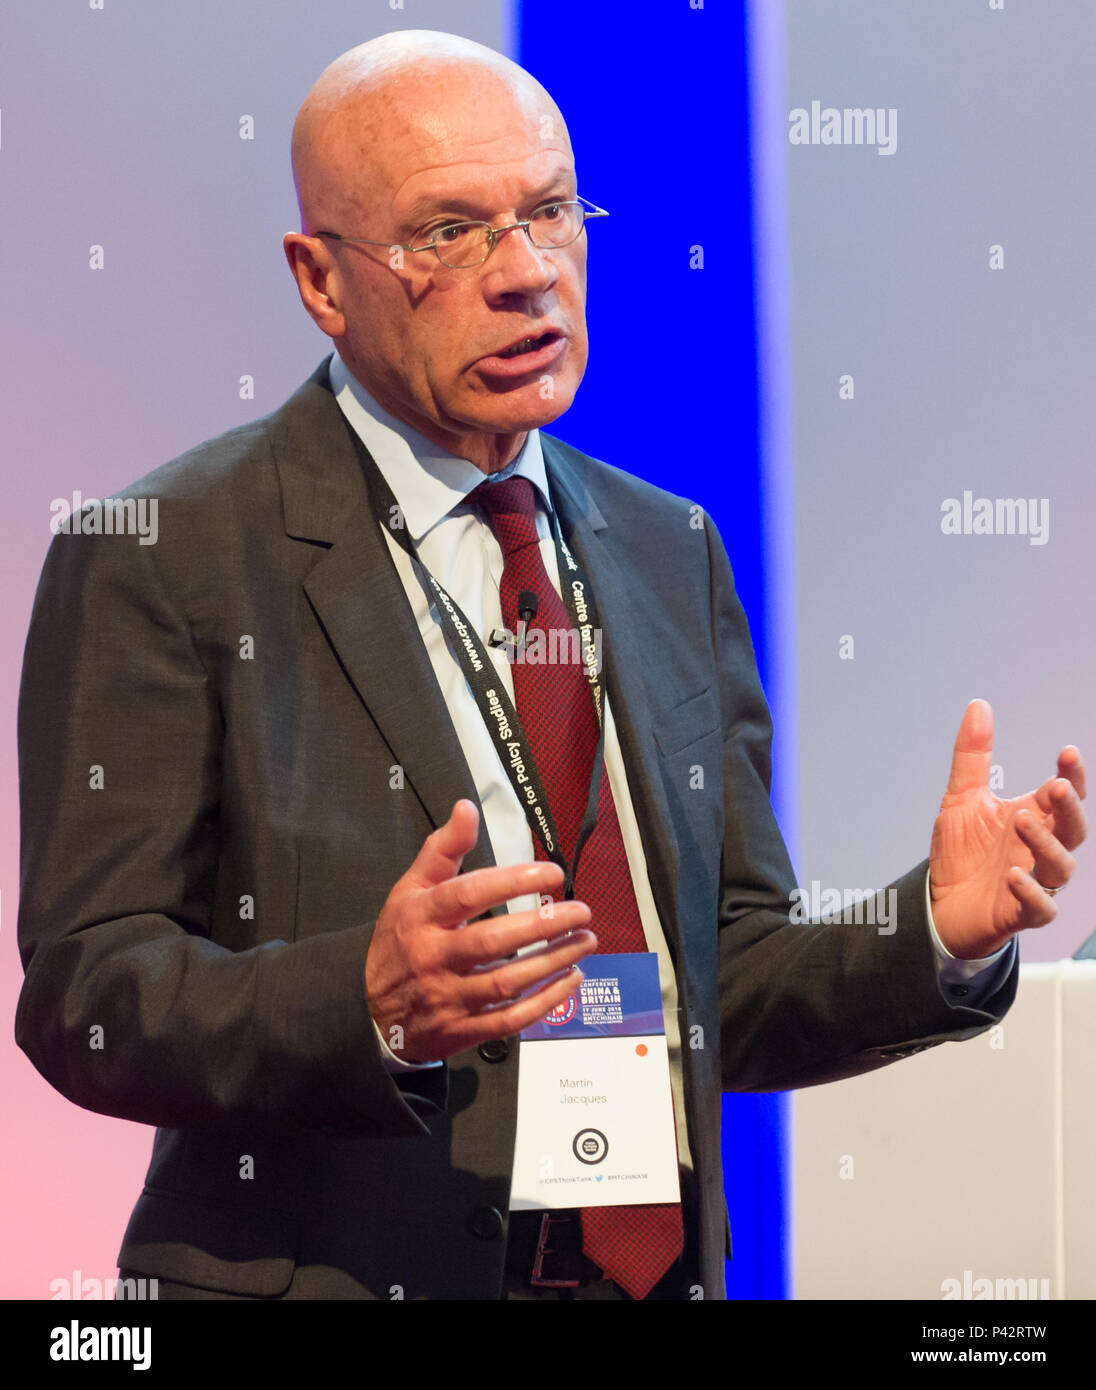 Martin Jacques, Author and Academic, during his intervention at the Margaret Thatcher Conference on China and Britain at Guildhall. Stock Photo